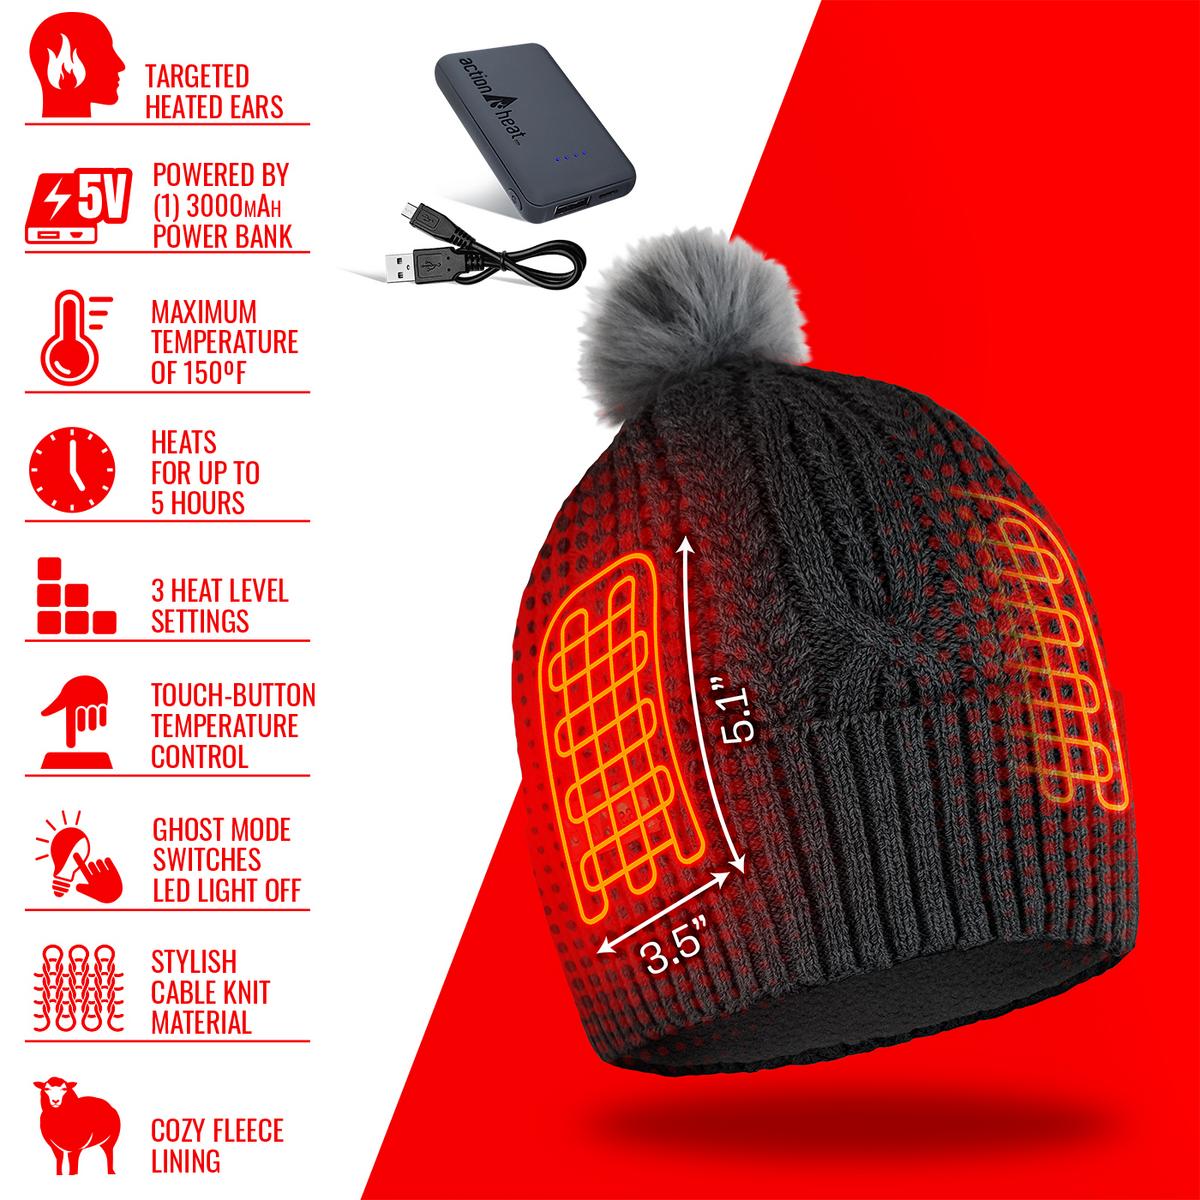 ActionHeat 5V Battery Heated Cable Knit Hat & Gaiter Bundle - Battery